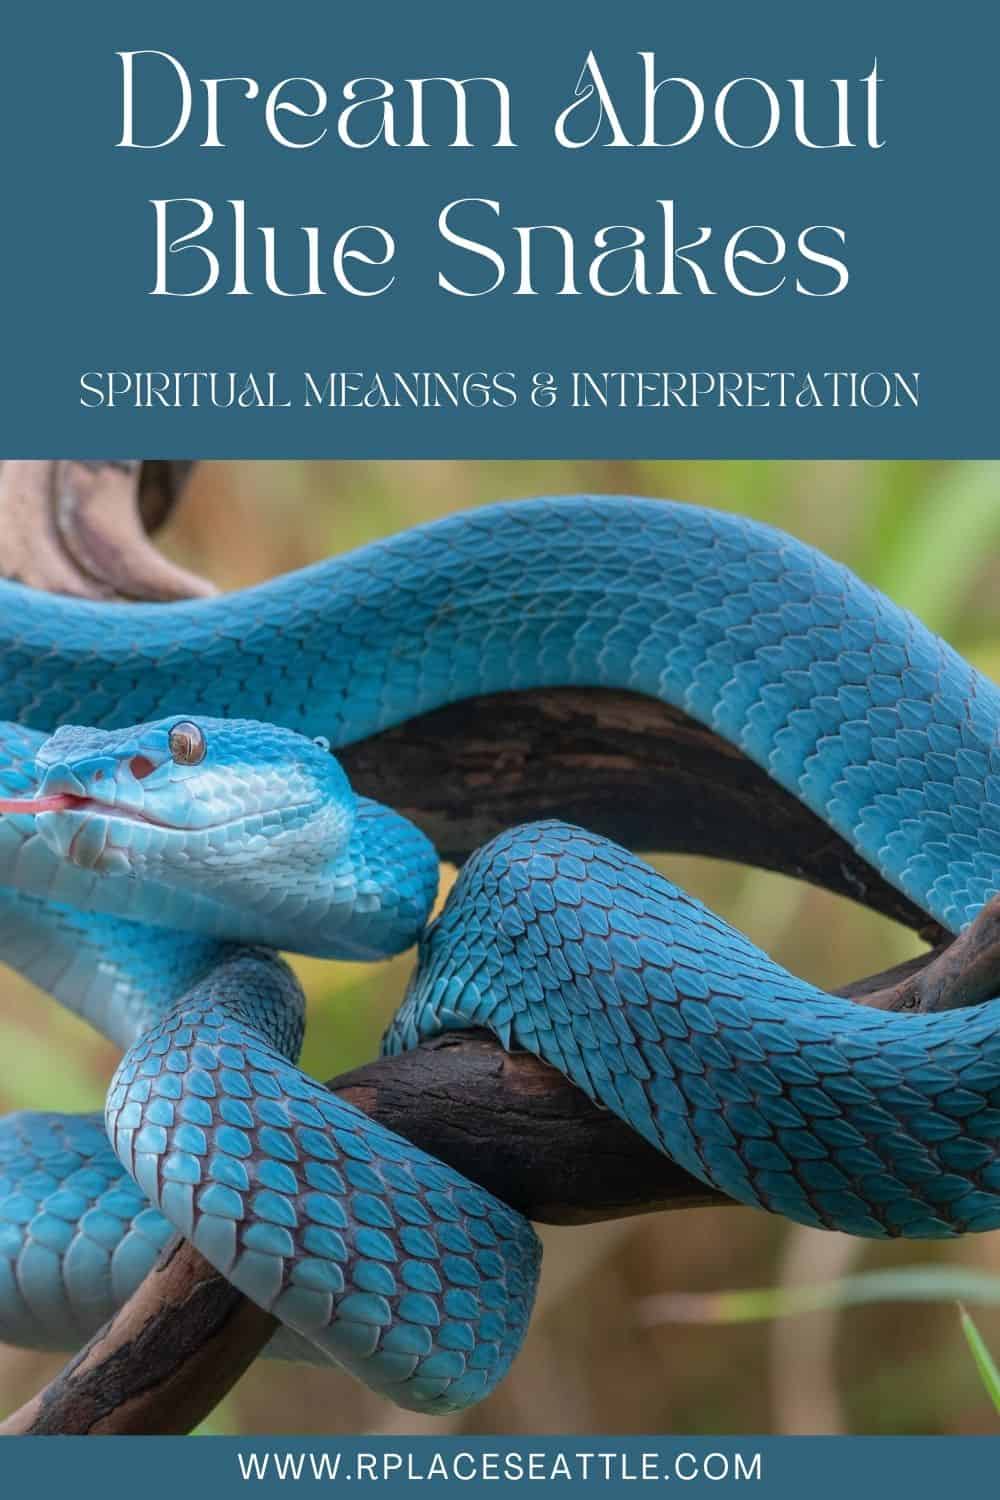 5. Dreams About Blue Snakes